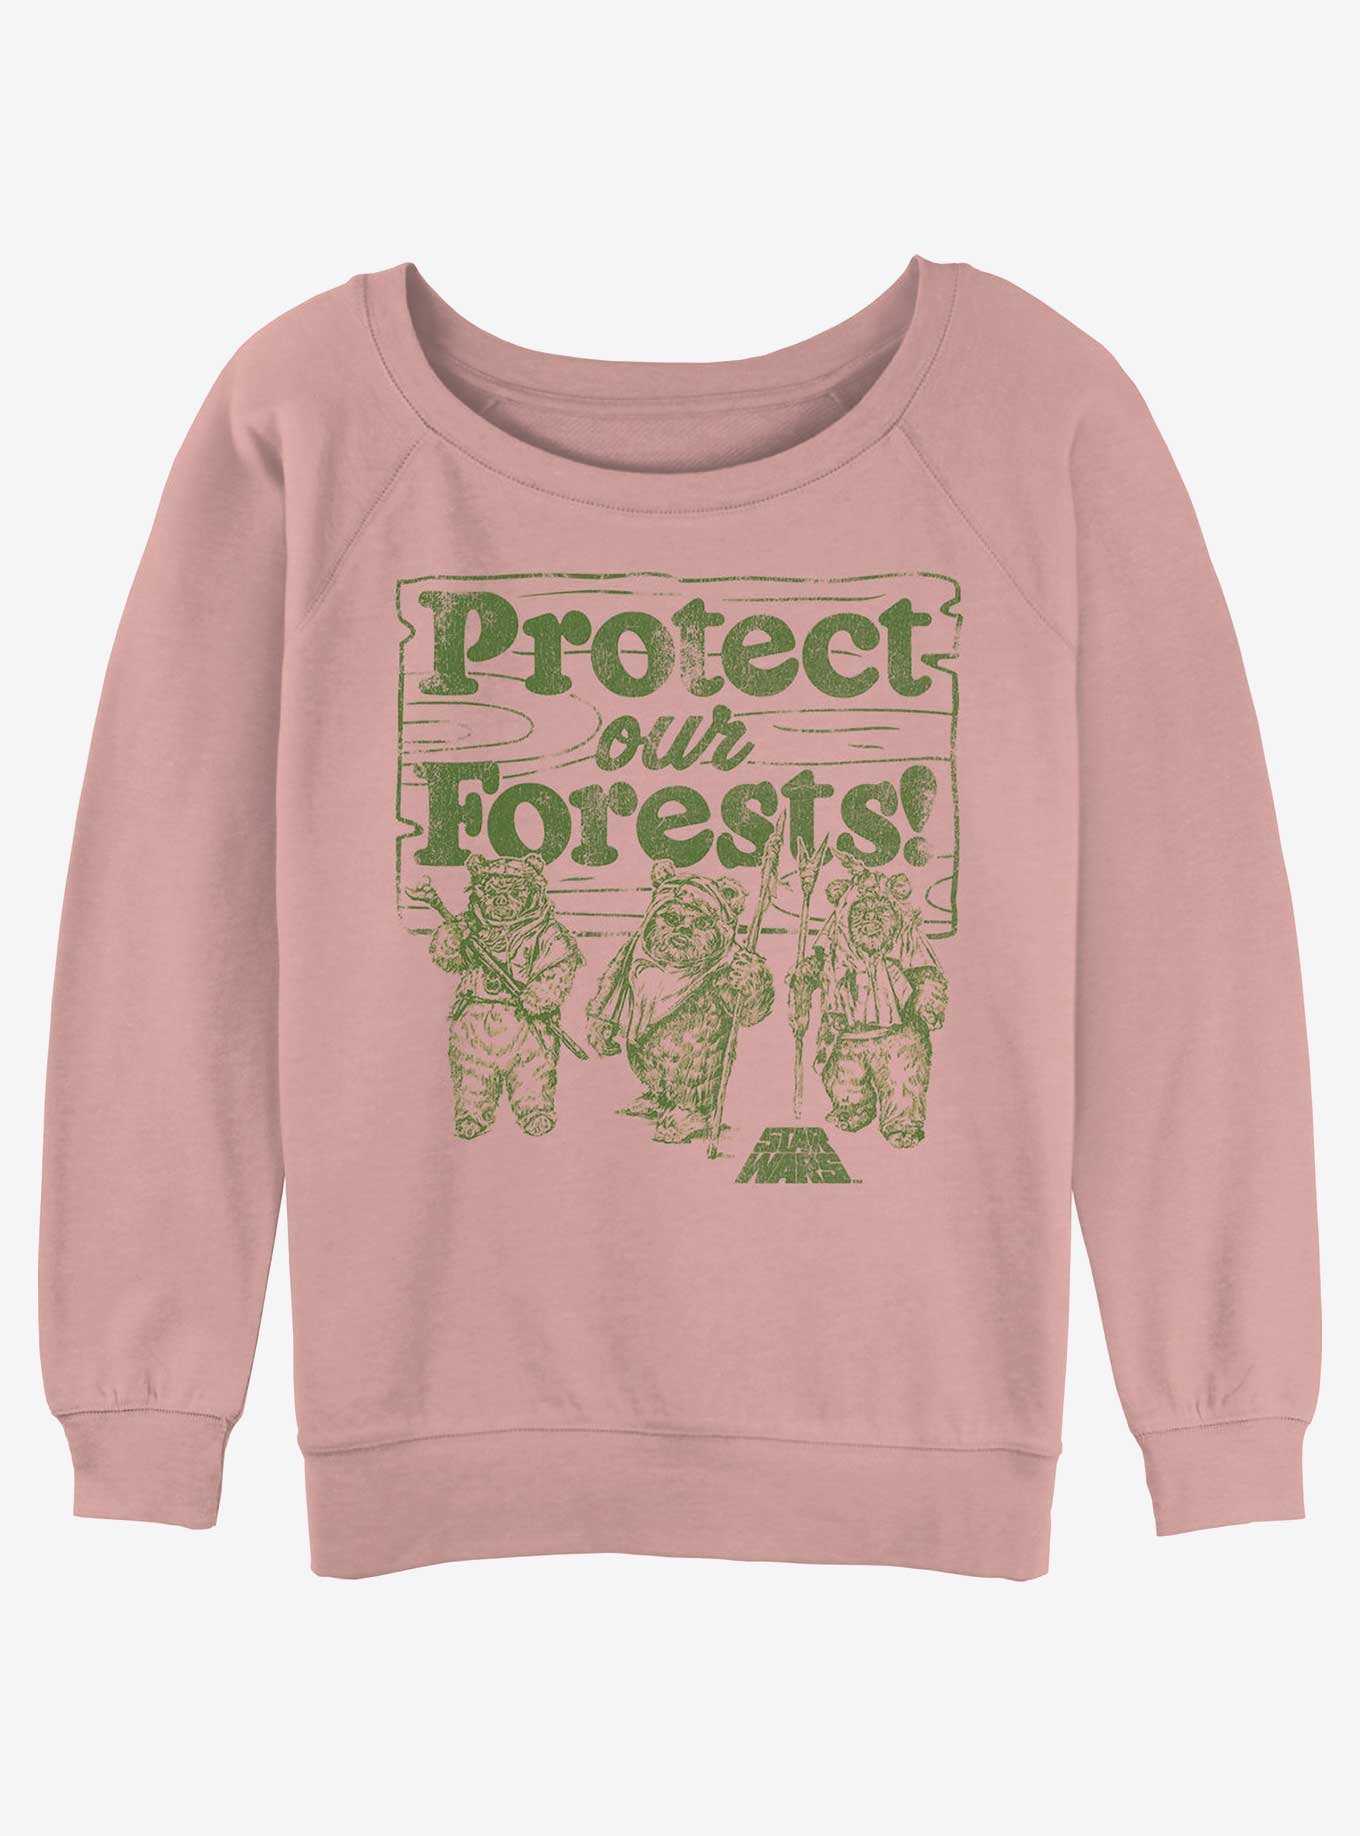 Star Wars Protect Our Forests Girls Slouchy Sweatshirt, , hi-res